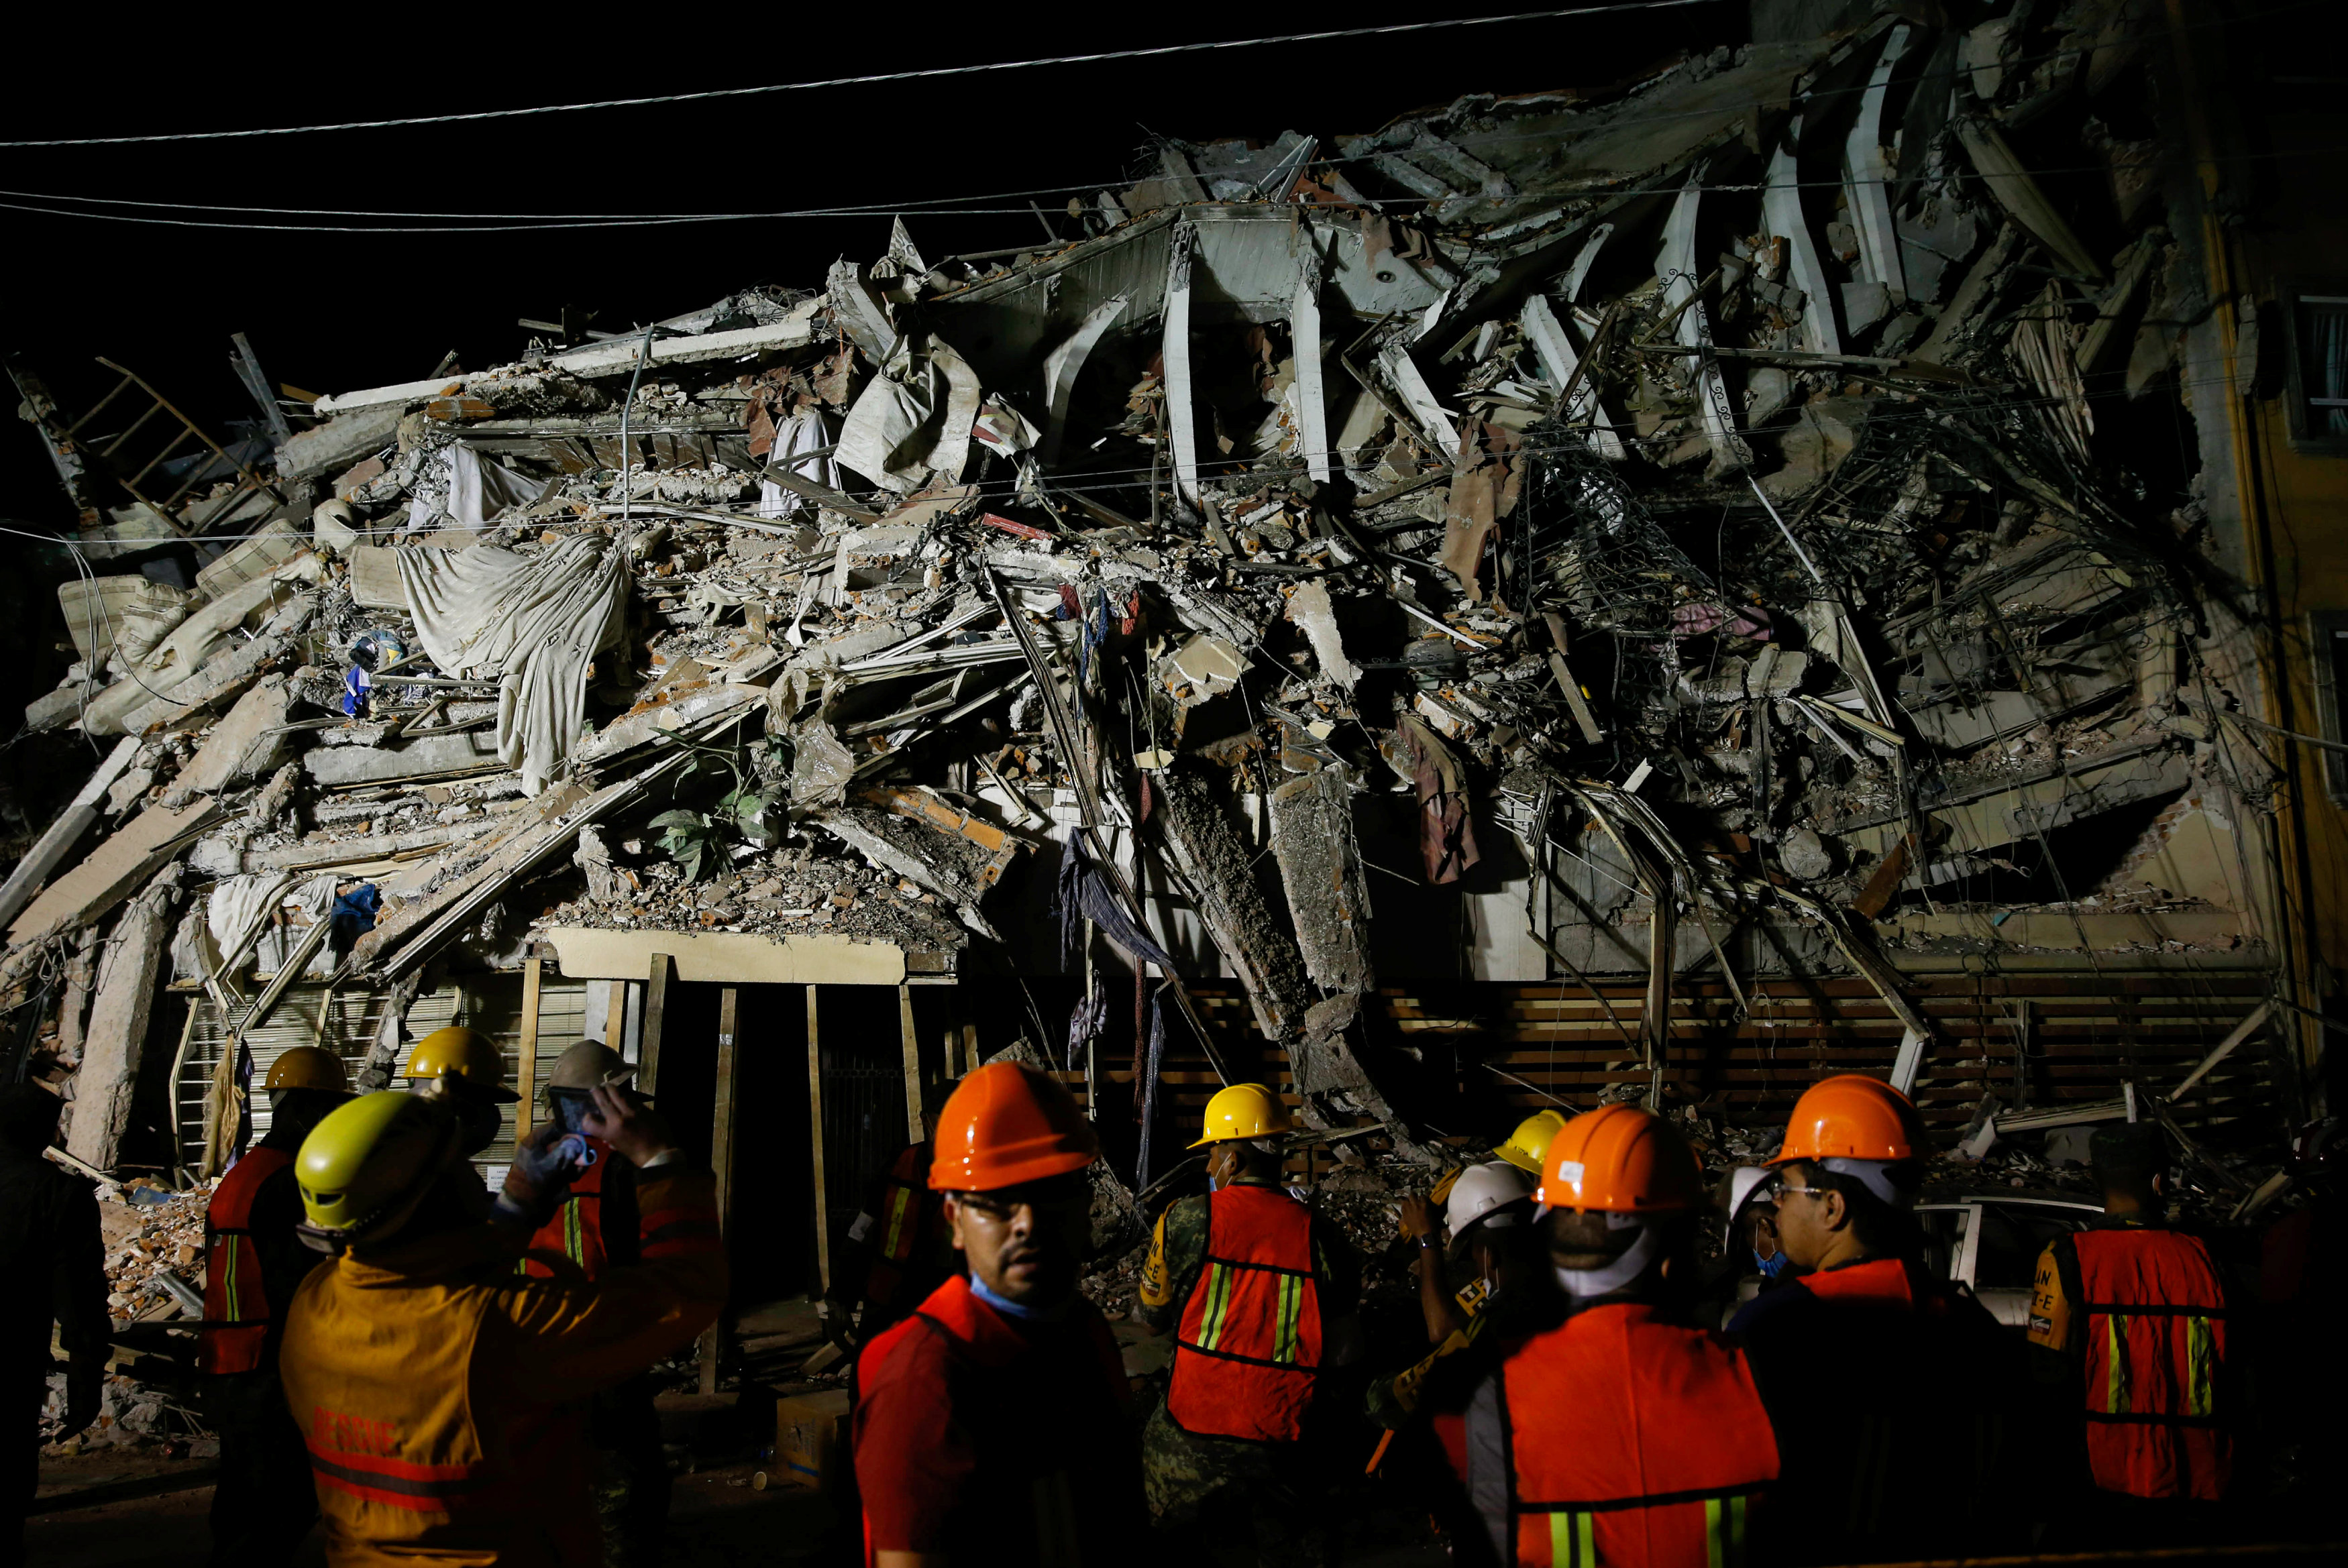 REFILE - REMOVING TYPO - Rescuers work at the site of a collapsed building after an earthquake in Mexico City, Mexico September 20, 2017. REUTERS/Henry Romero